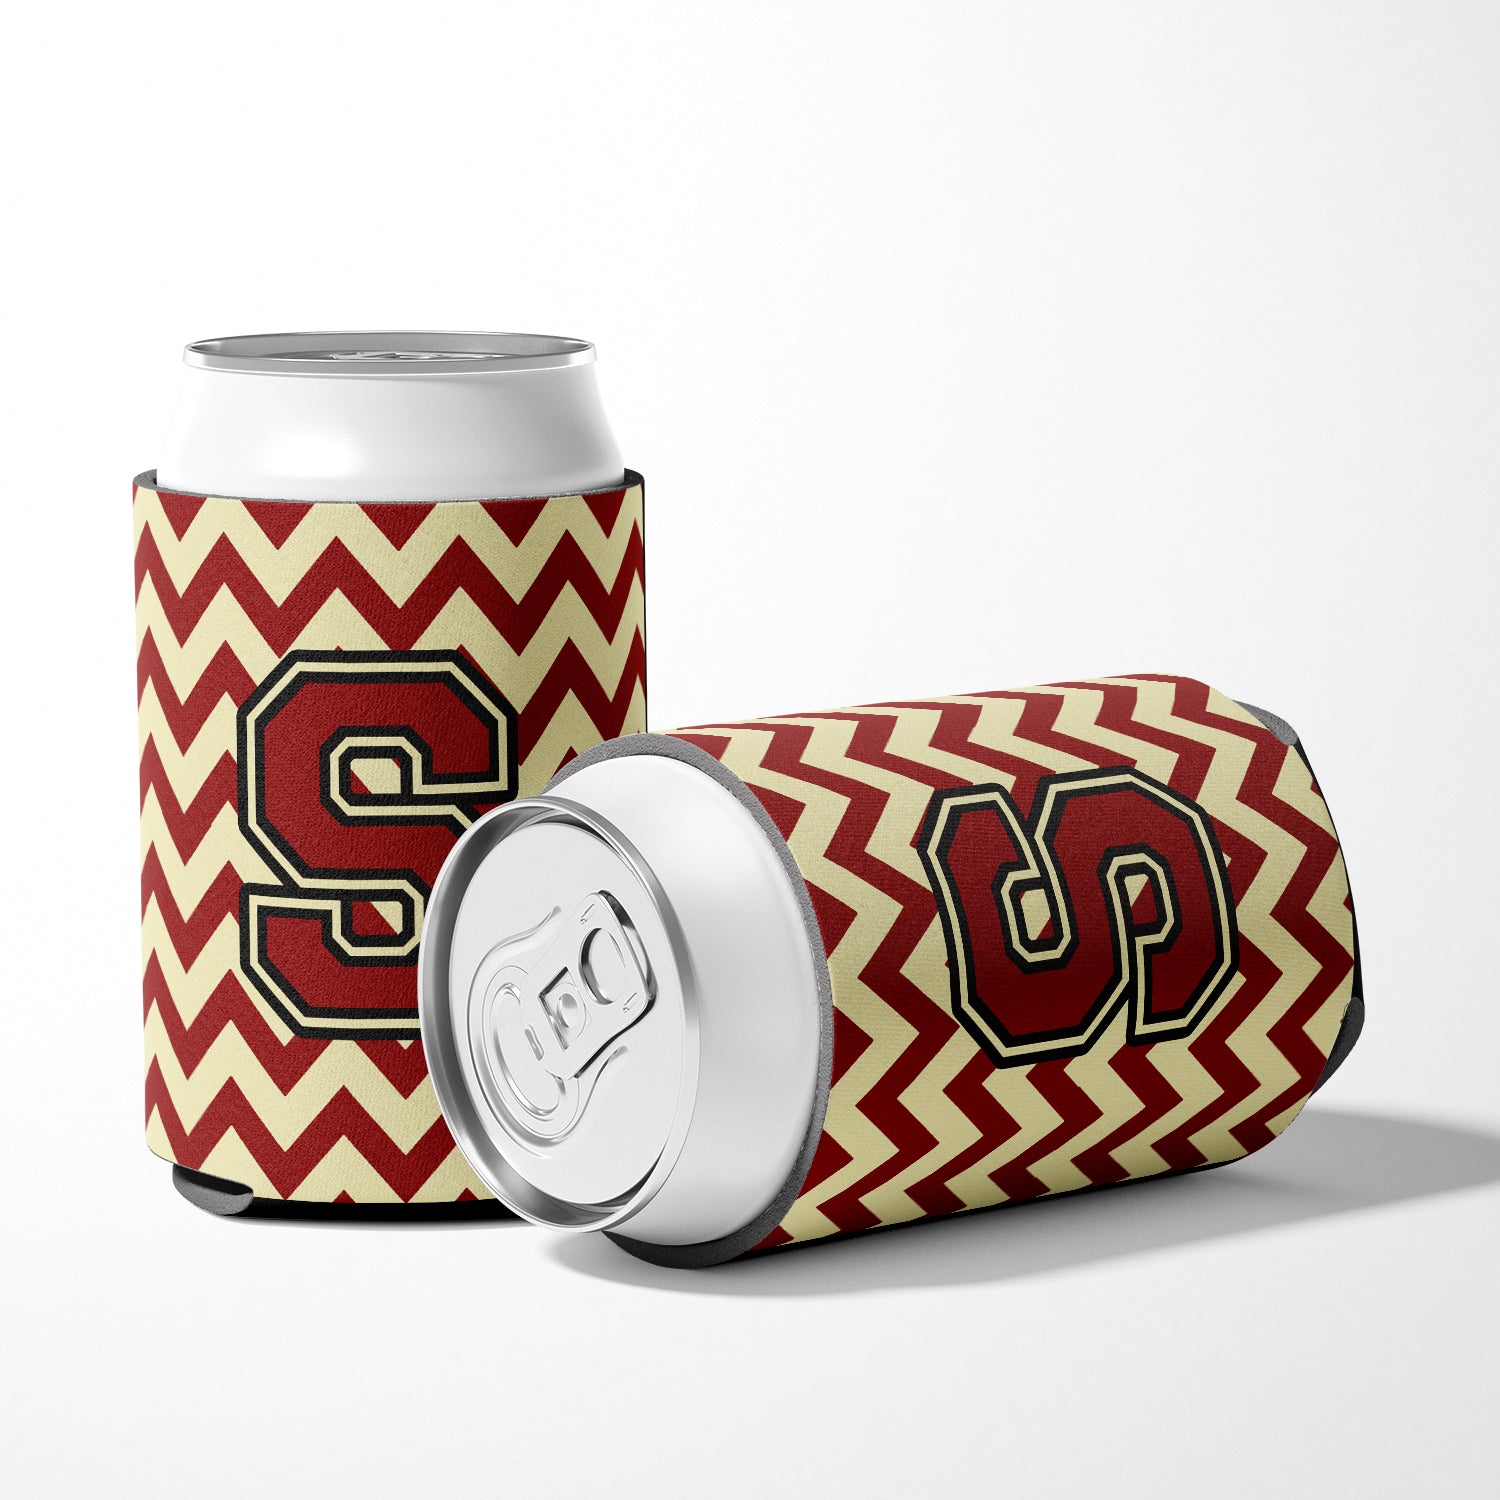 Letter S Chevron Maroon and Gold Can or Bottle Hugger CJ1061-SCC.